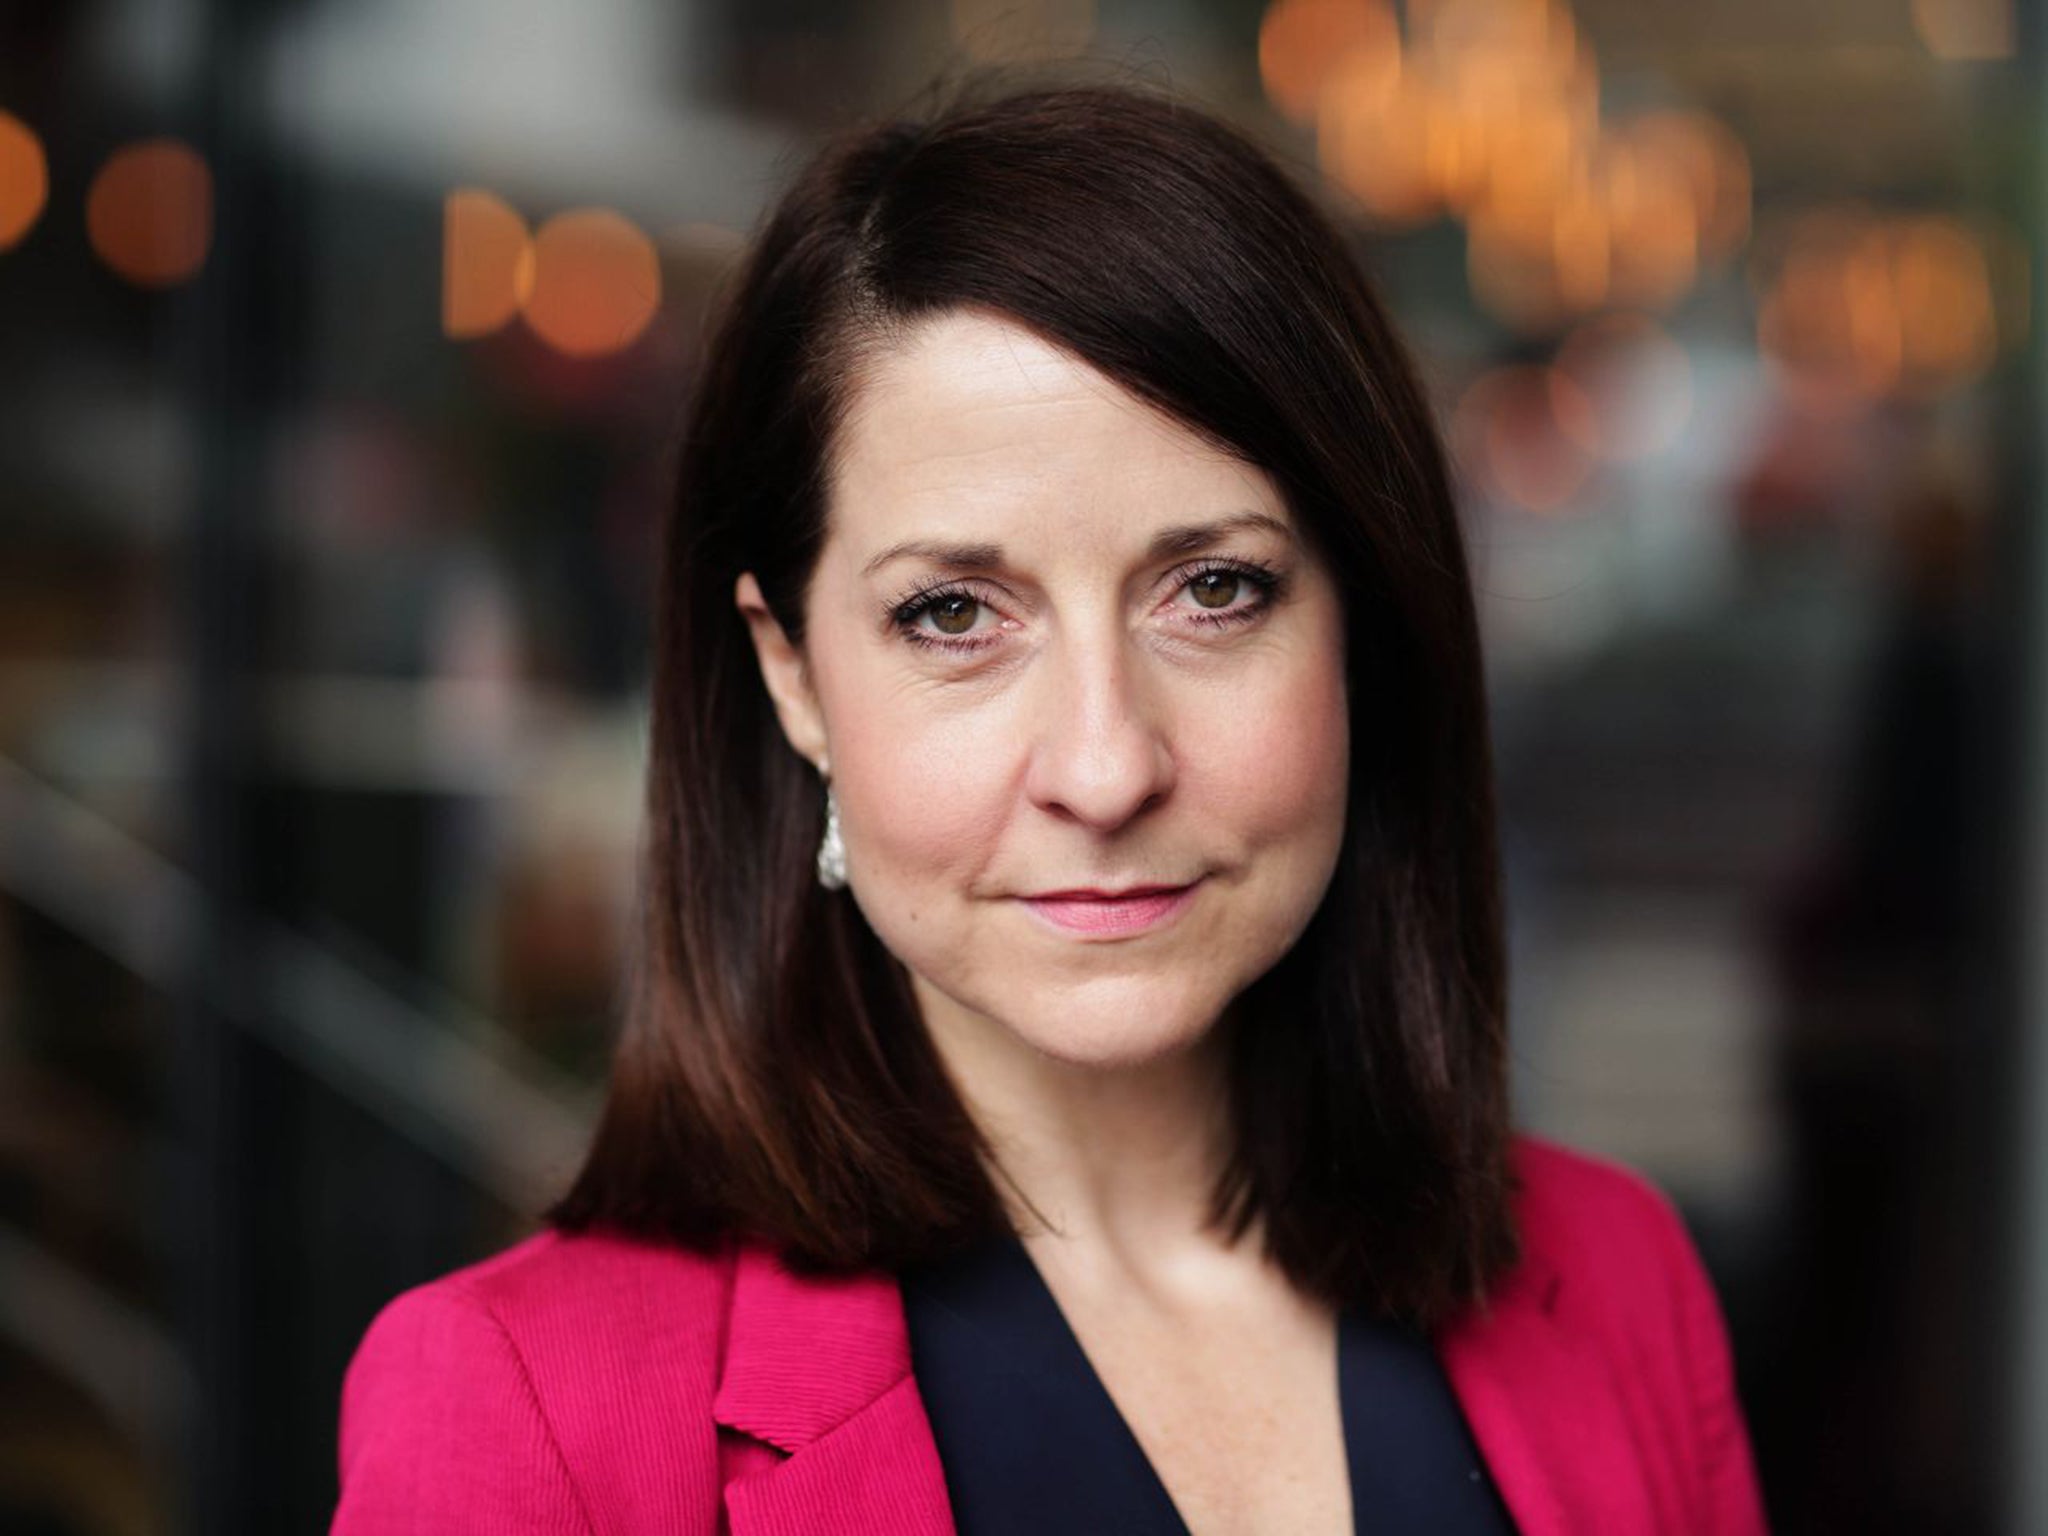 Liz Kendall says Labour must present policies for 2020-25, not ‘30 years ago’